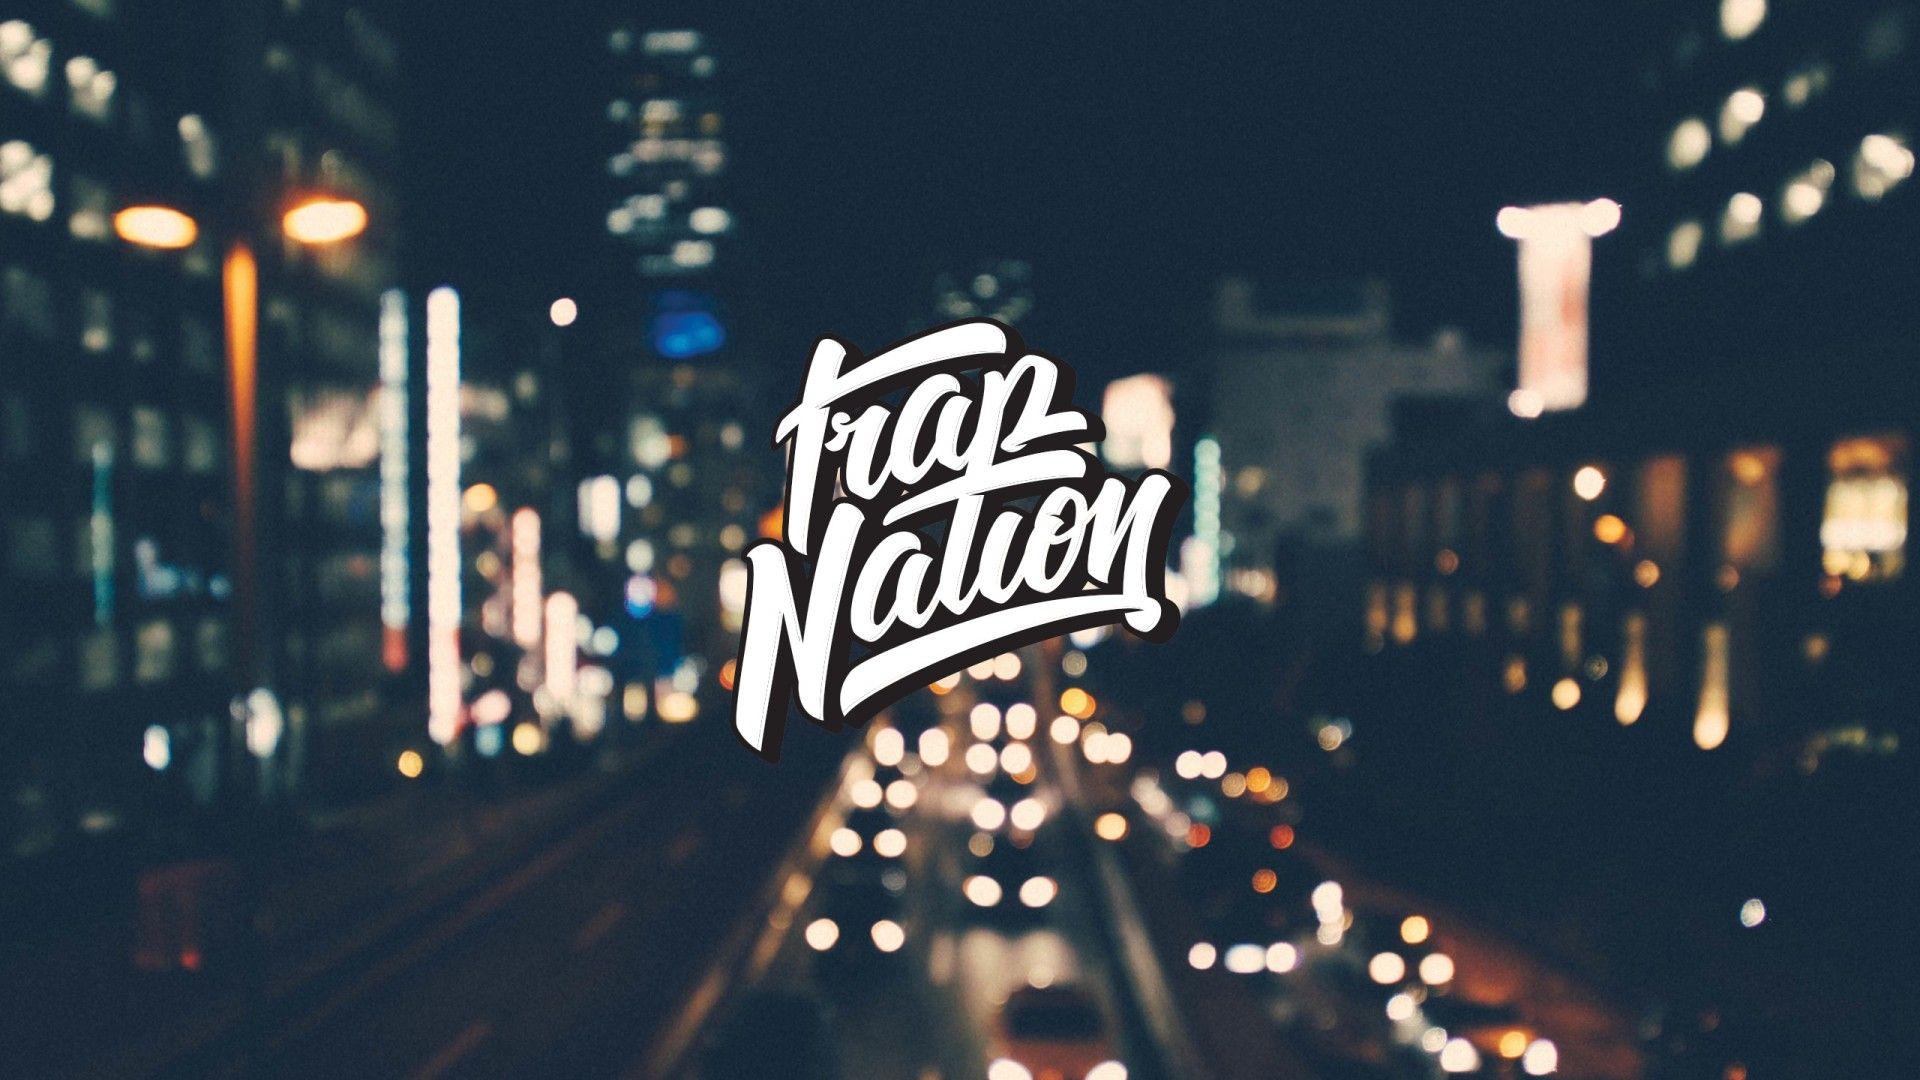 Download Trap Nation Wallpaper Gallery